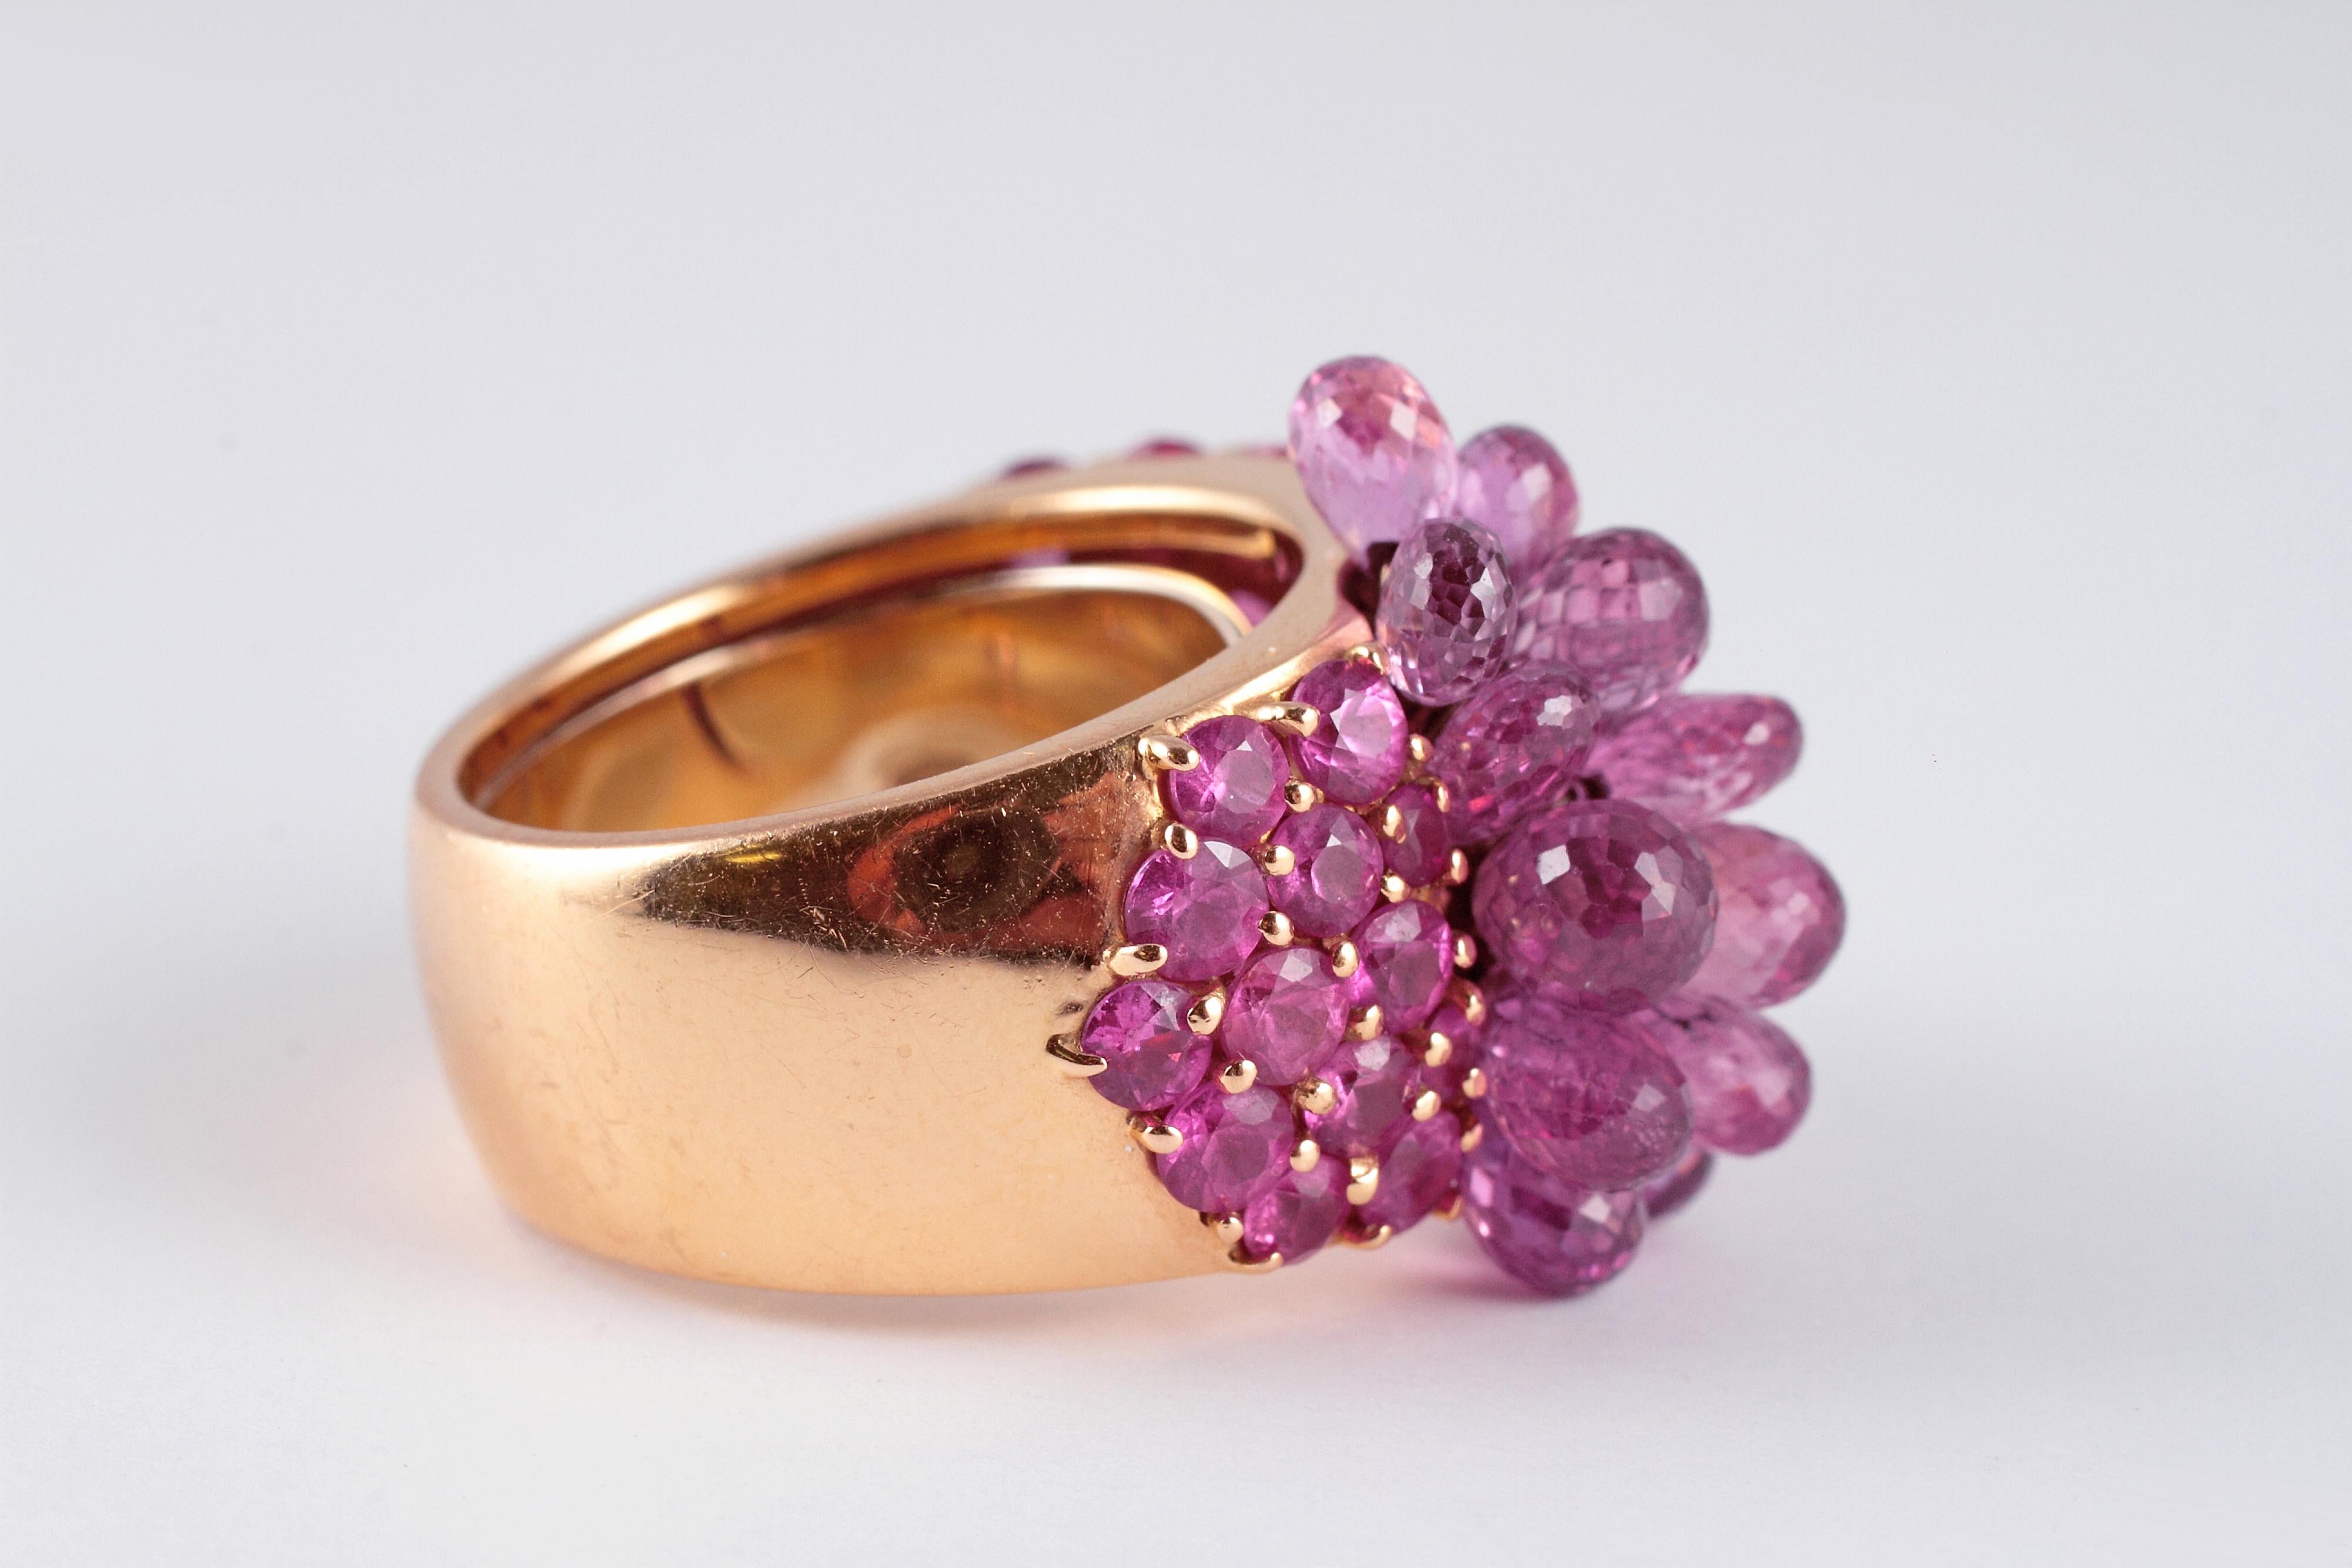 Such a fabulous burst of color from famed London designer David Morris.! The 41 prong-set, round pink sapphires and 15 en tremblant briolette-cut pink sapphires simply shine! Size 6 1/2, this ring has a sizer that could be removed to make it larger.